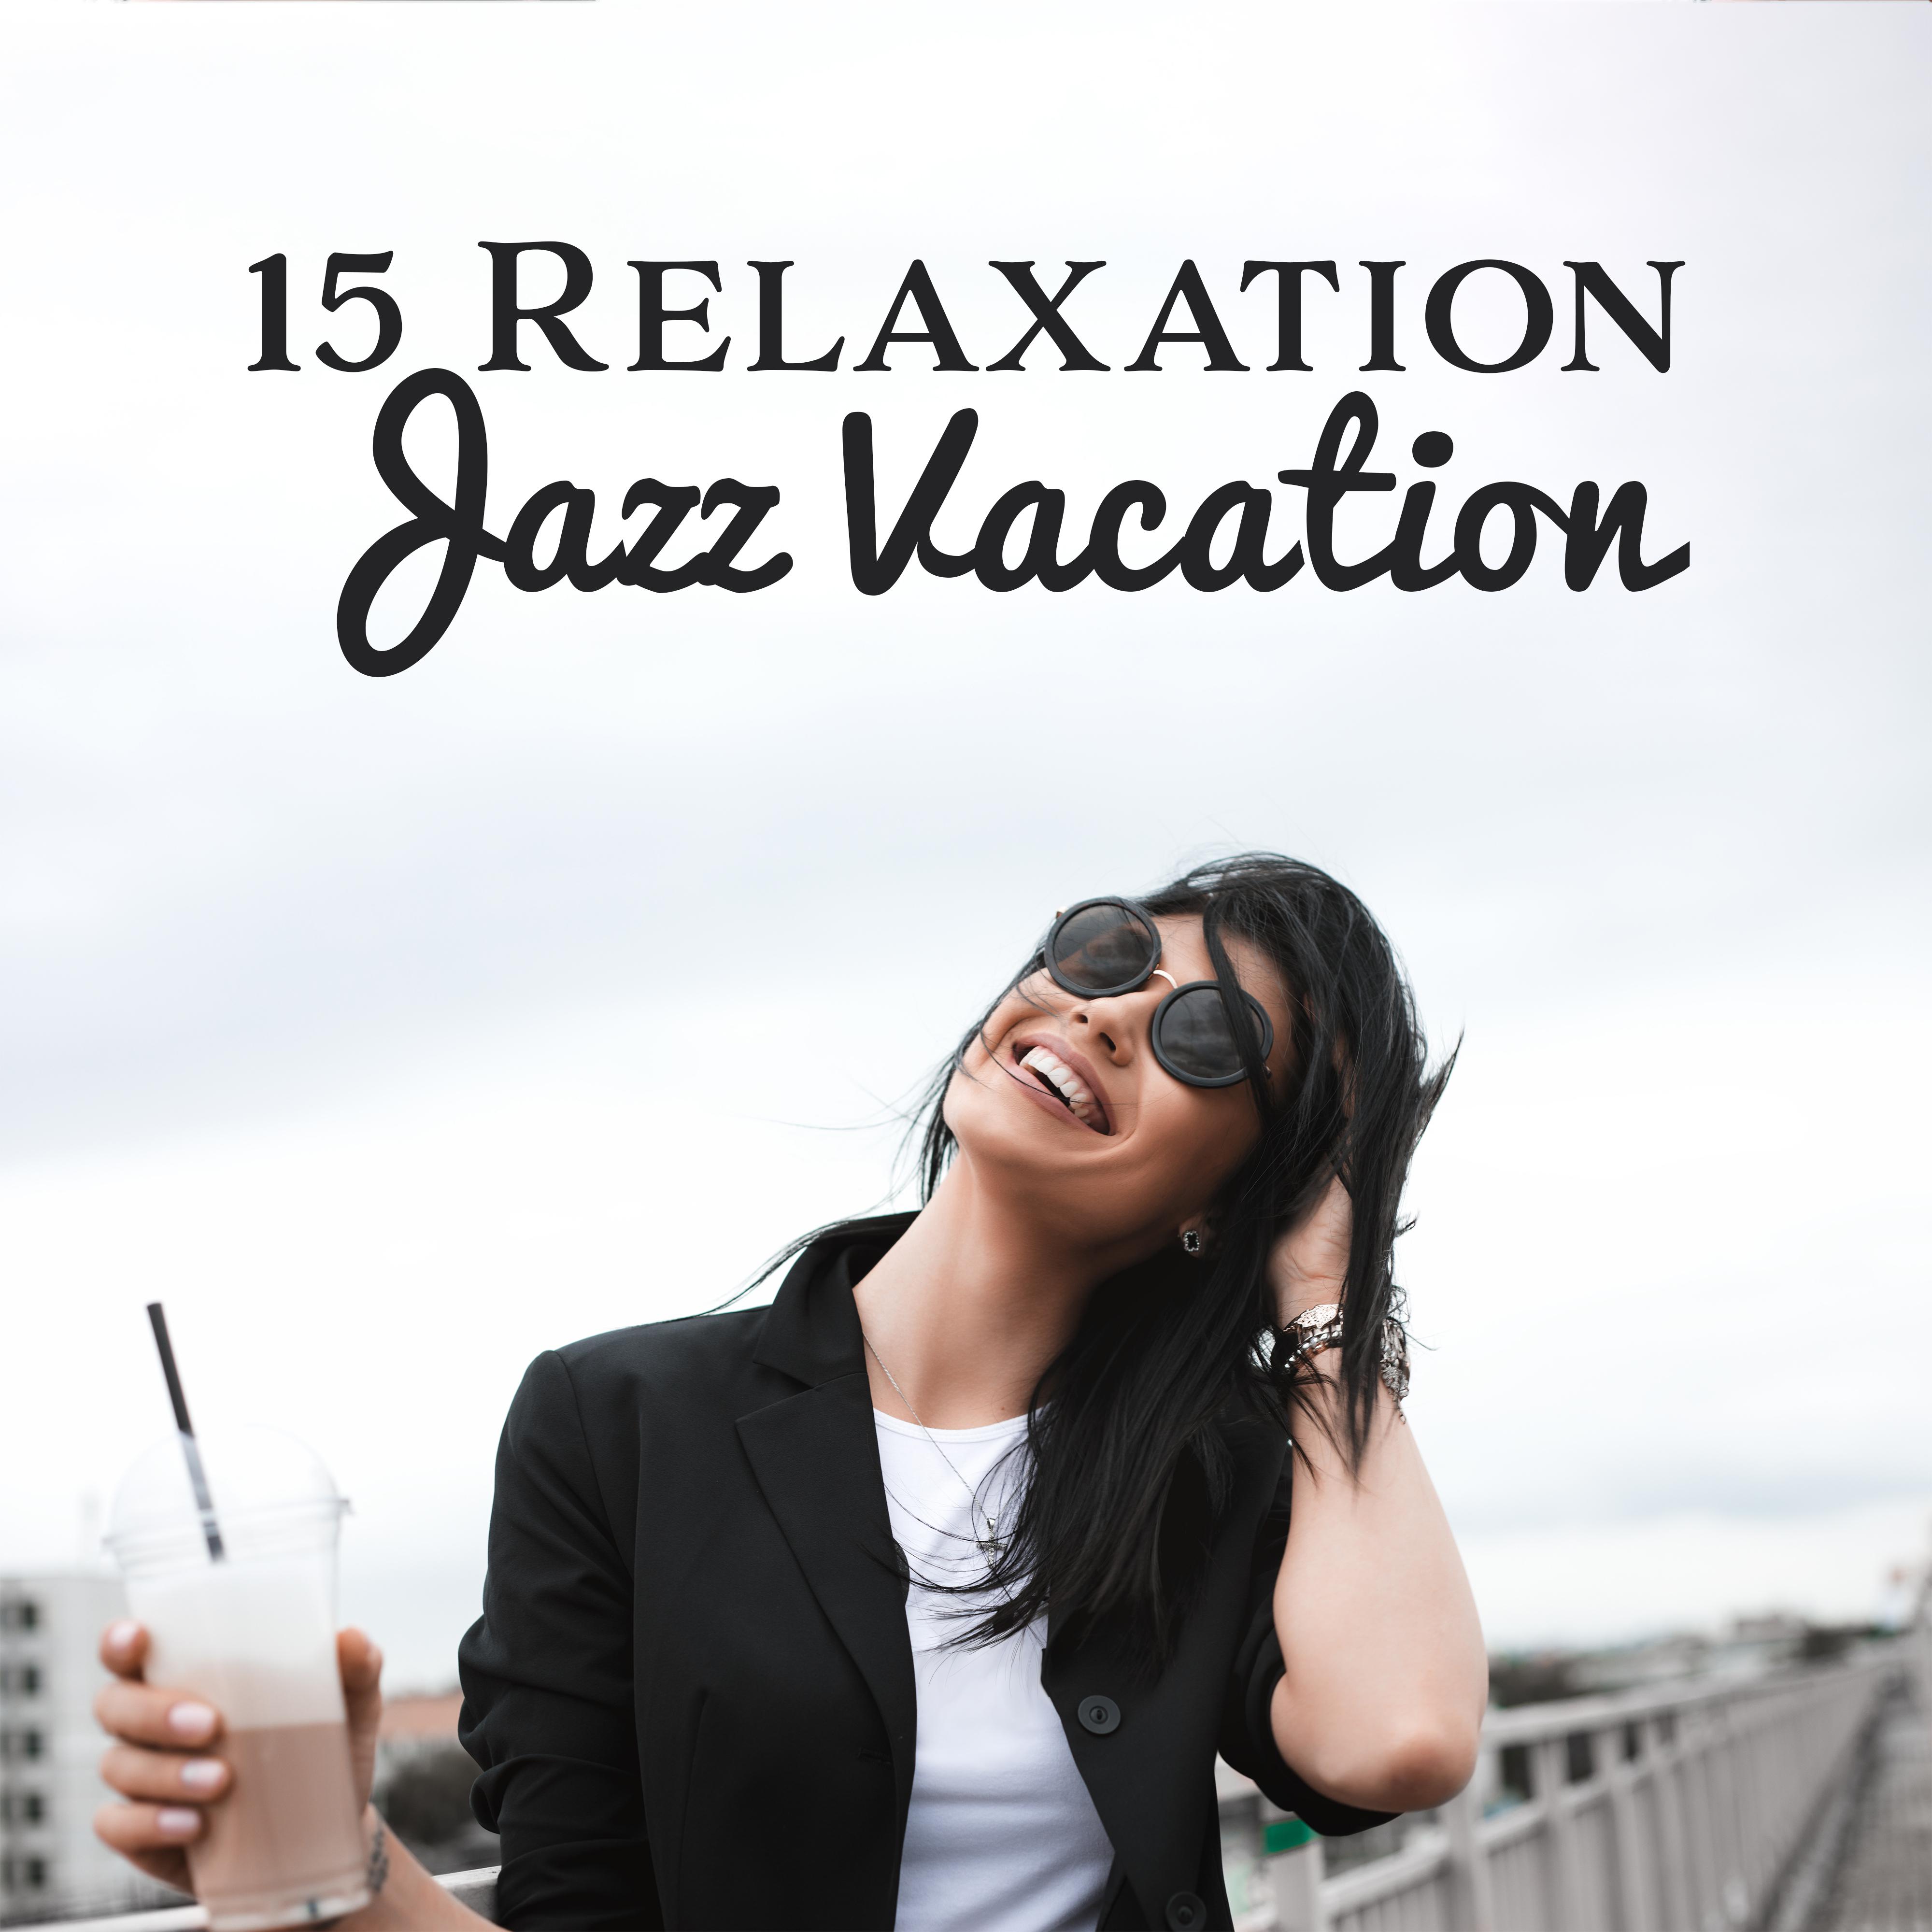 15 Relaxation Jazz Vacation – Smooth Music 2019, Instrumental Jazz to Calm Down, Jazz Vibes, Relax Zone